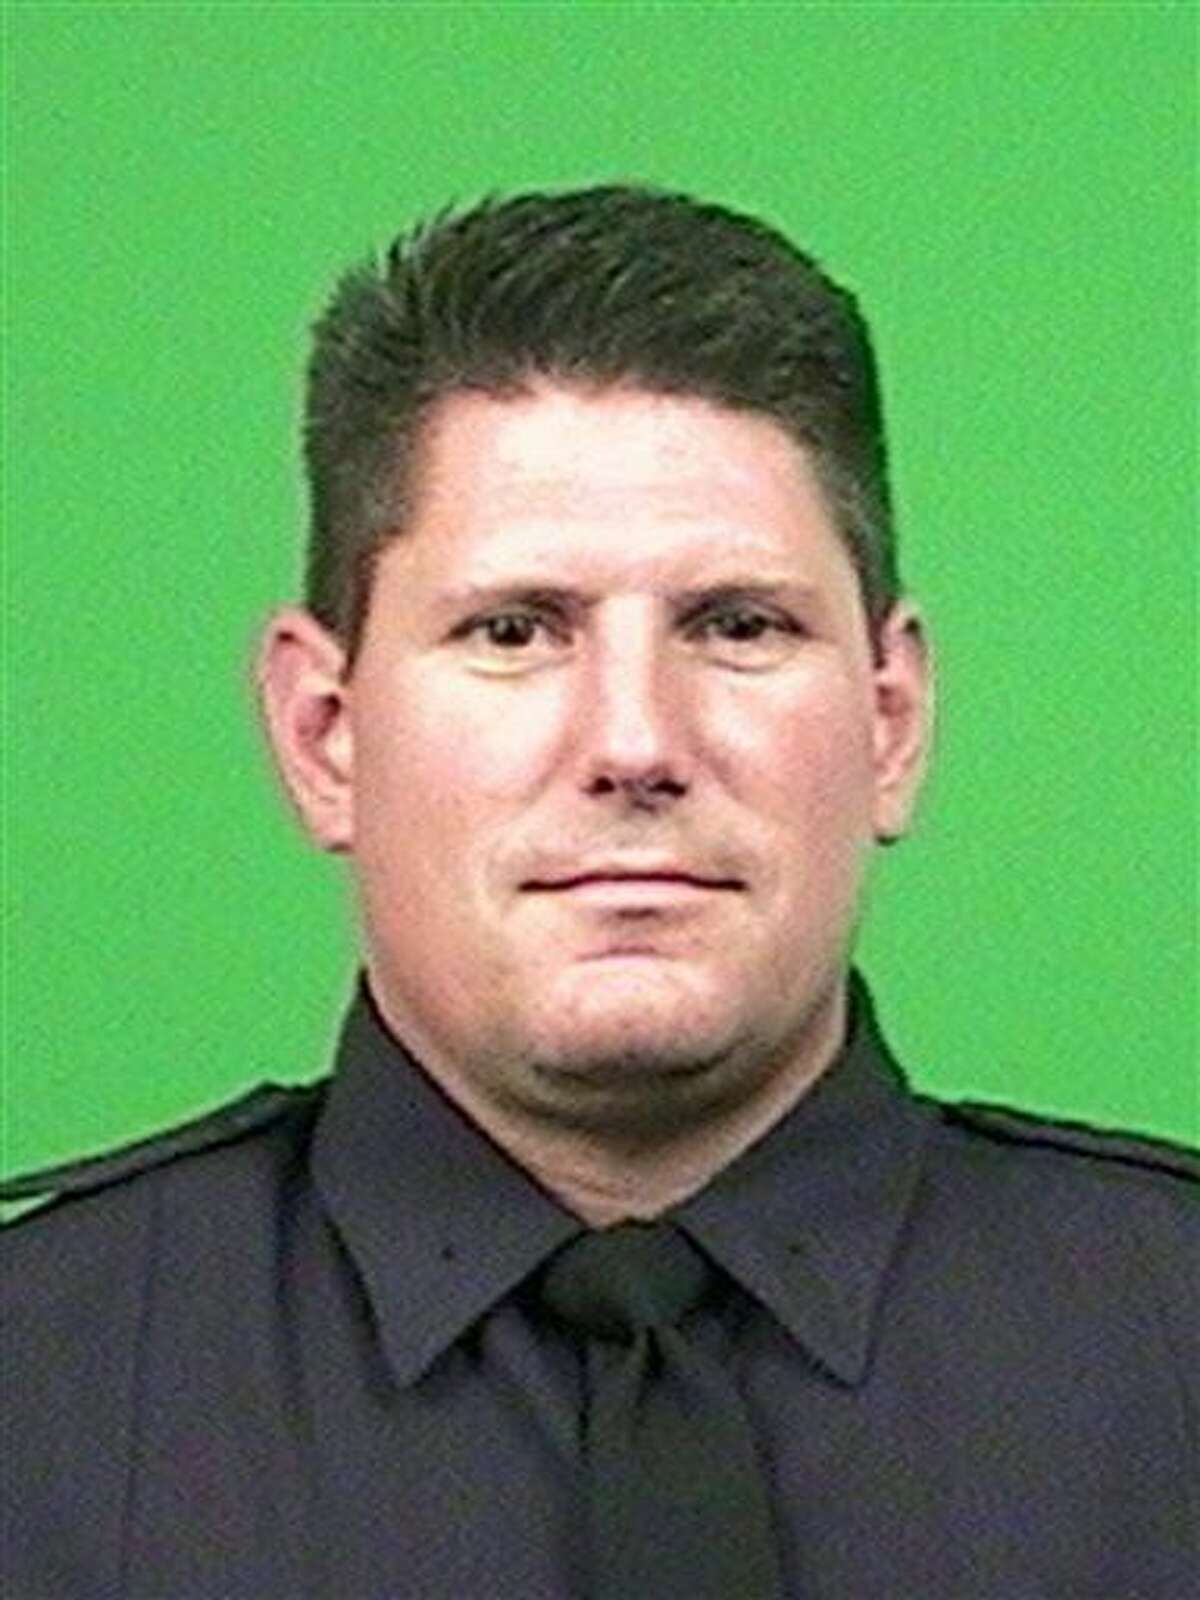 This photo provided by the New York City Police Department shows Detective Joseph Lemm. Police Commissioner William Bratton said on Monday, Dec. 21, 2015, that Lemm is one of six American troops killed in a suicide attack near Bagram Airfield in Afghanistan. (New York City Police Department via AP)